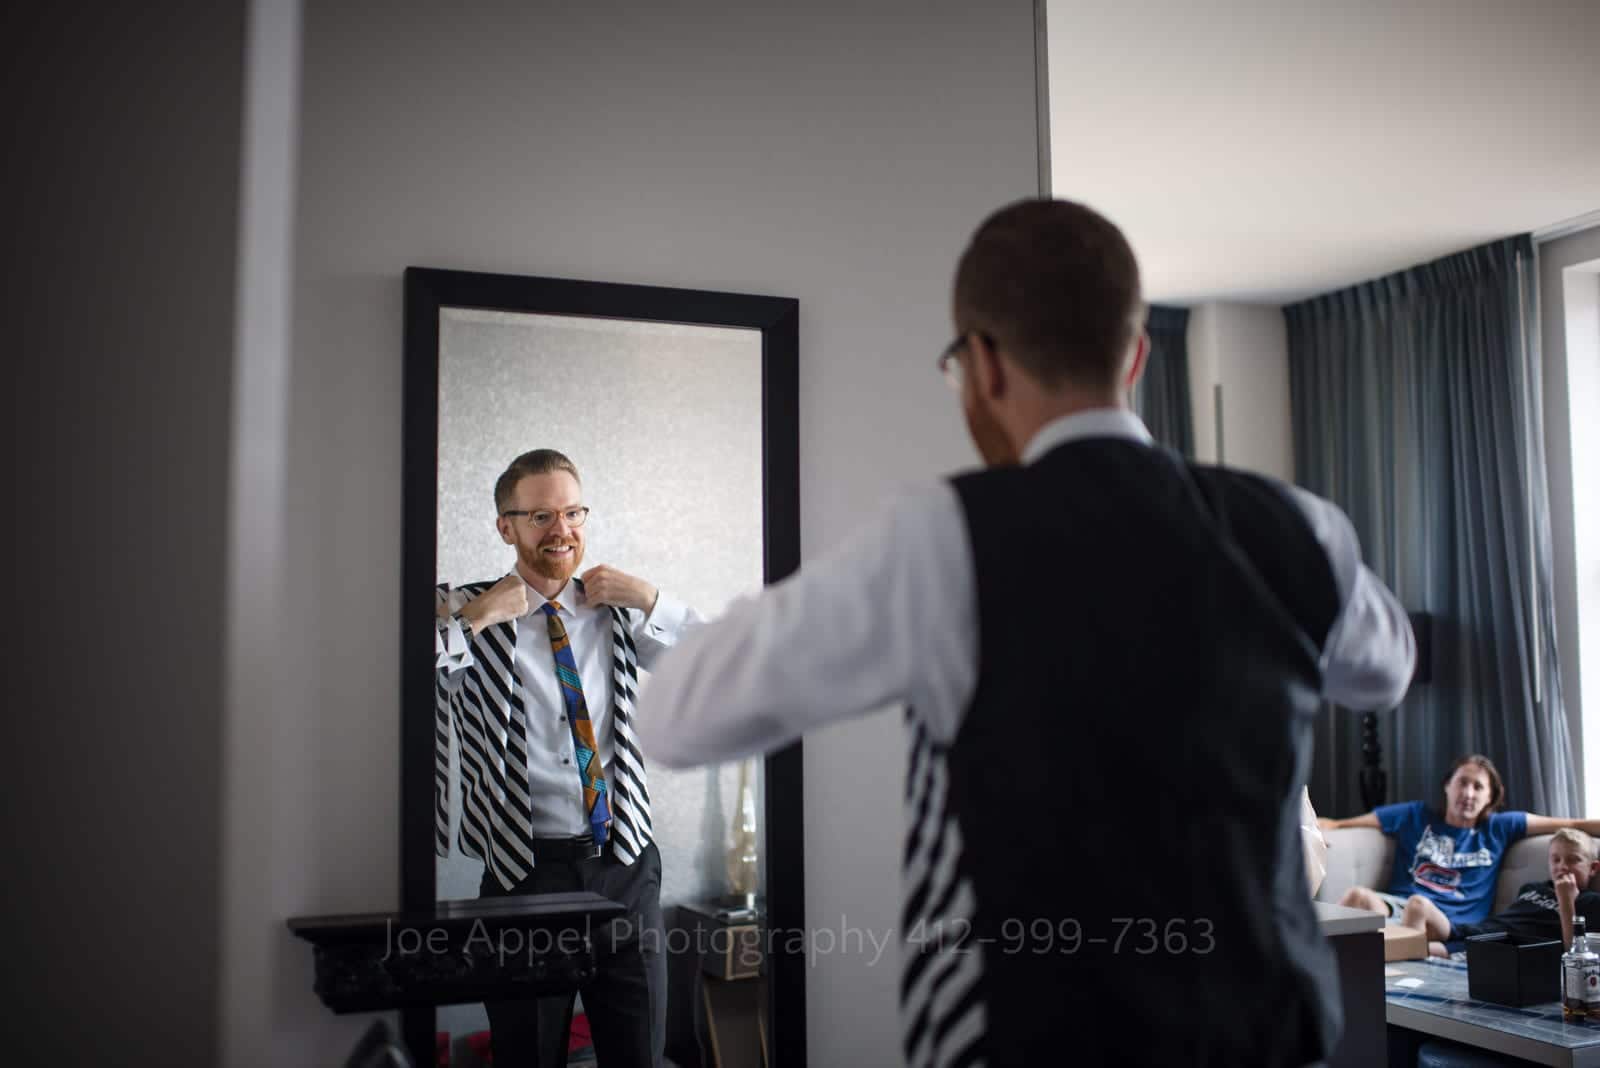 A bearded man looks in a mirror as he puts on his necktie in a hotel room. He's wearing a black and white striped vest.